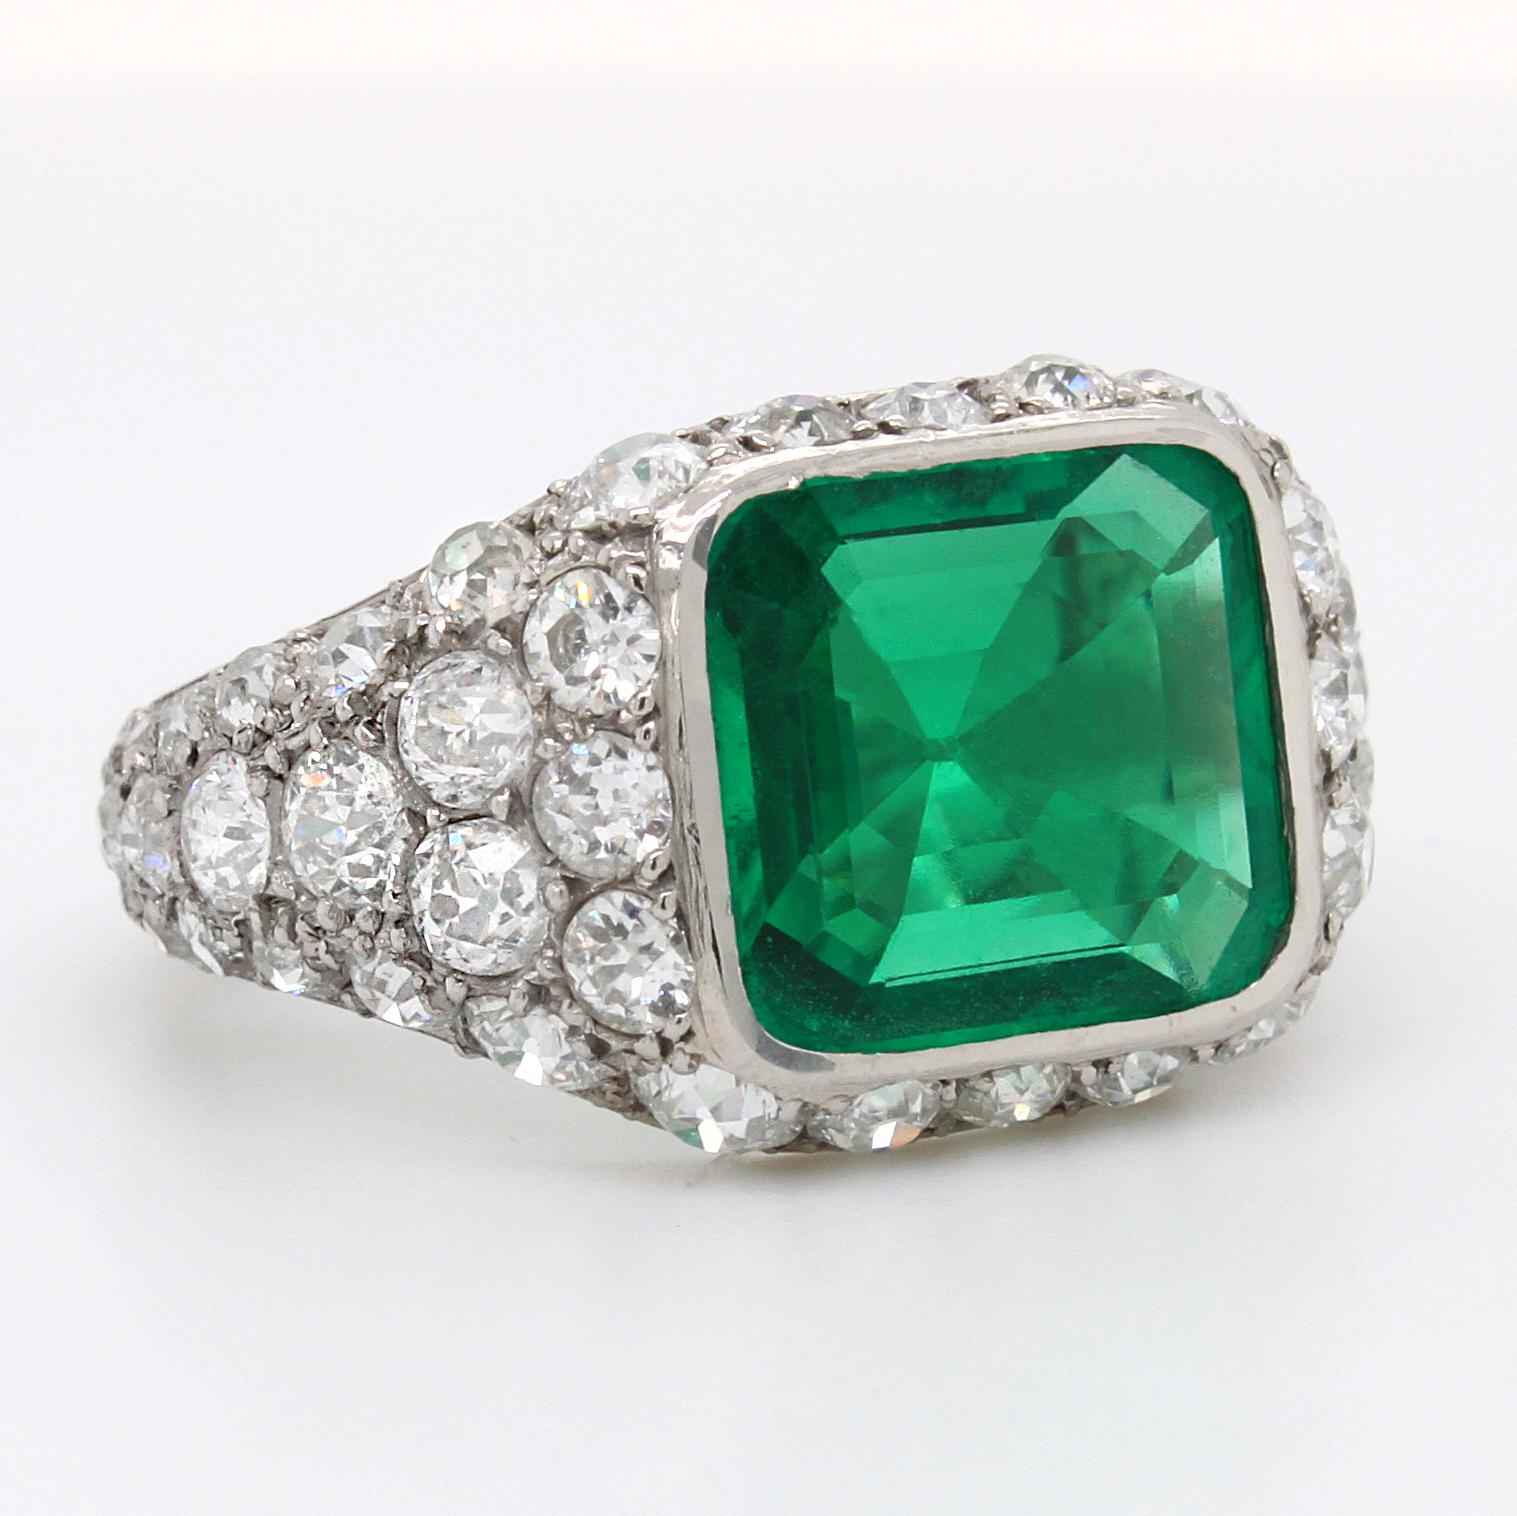 An old mine Colombian emerald and diamond ring in 18k white gold. The antique cushion cut emerald has a strong crystal and beautiful deep and vivid green colour adding to the allure of the gemstone. It weighs approximately 2.85 carats and is of